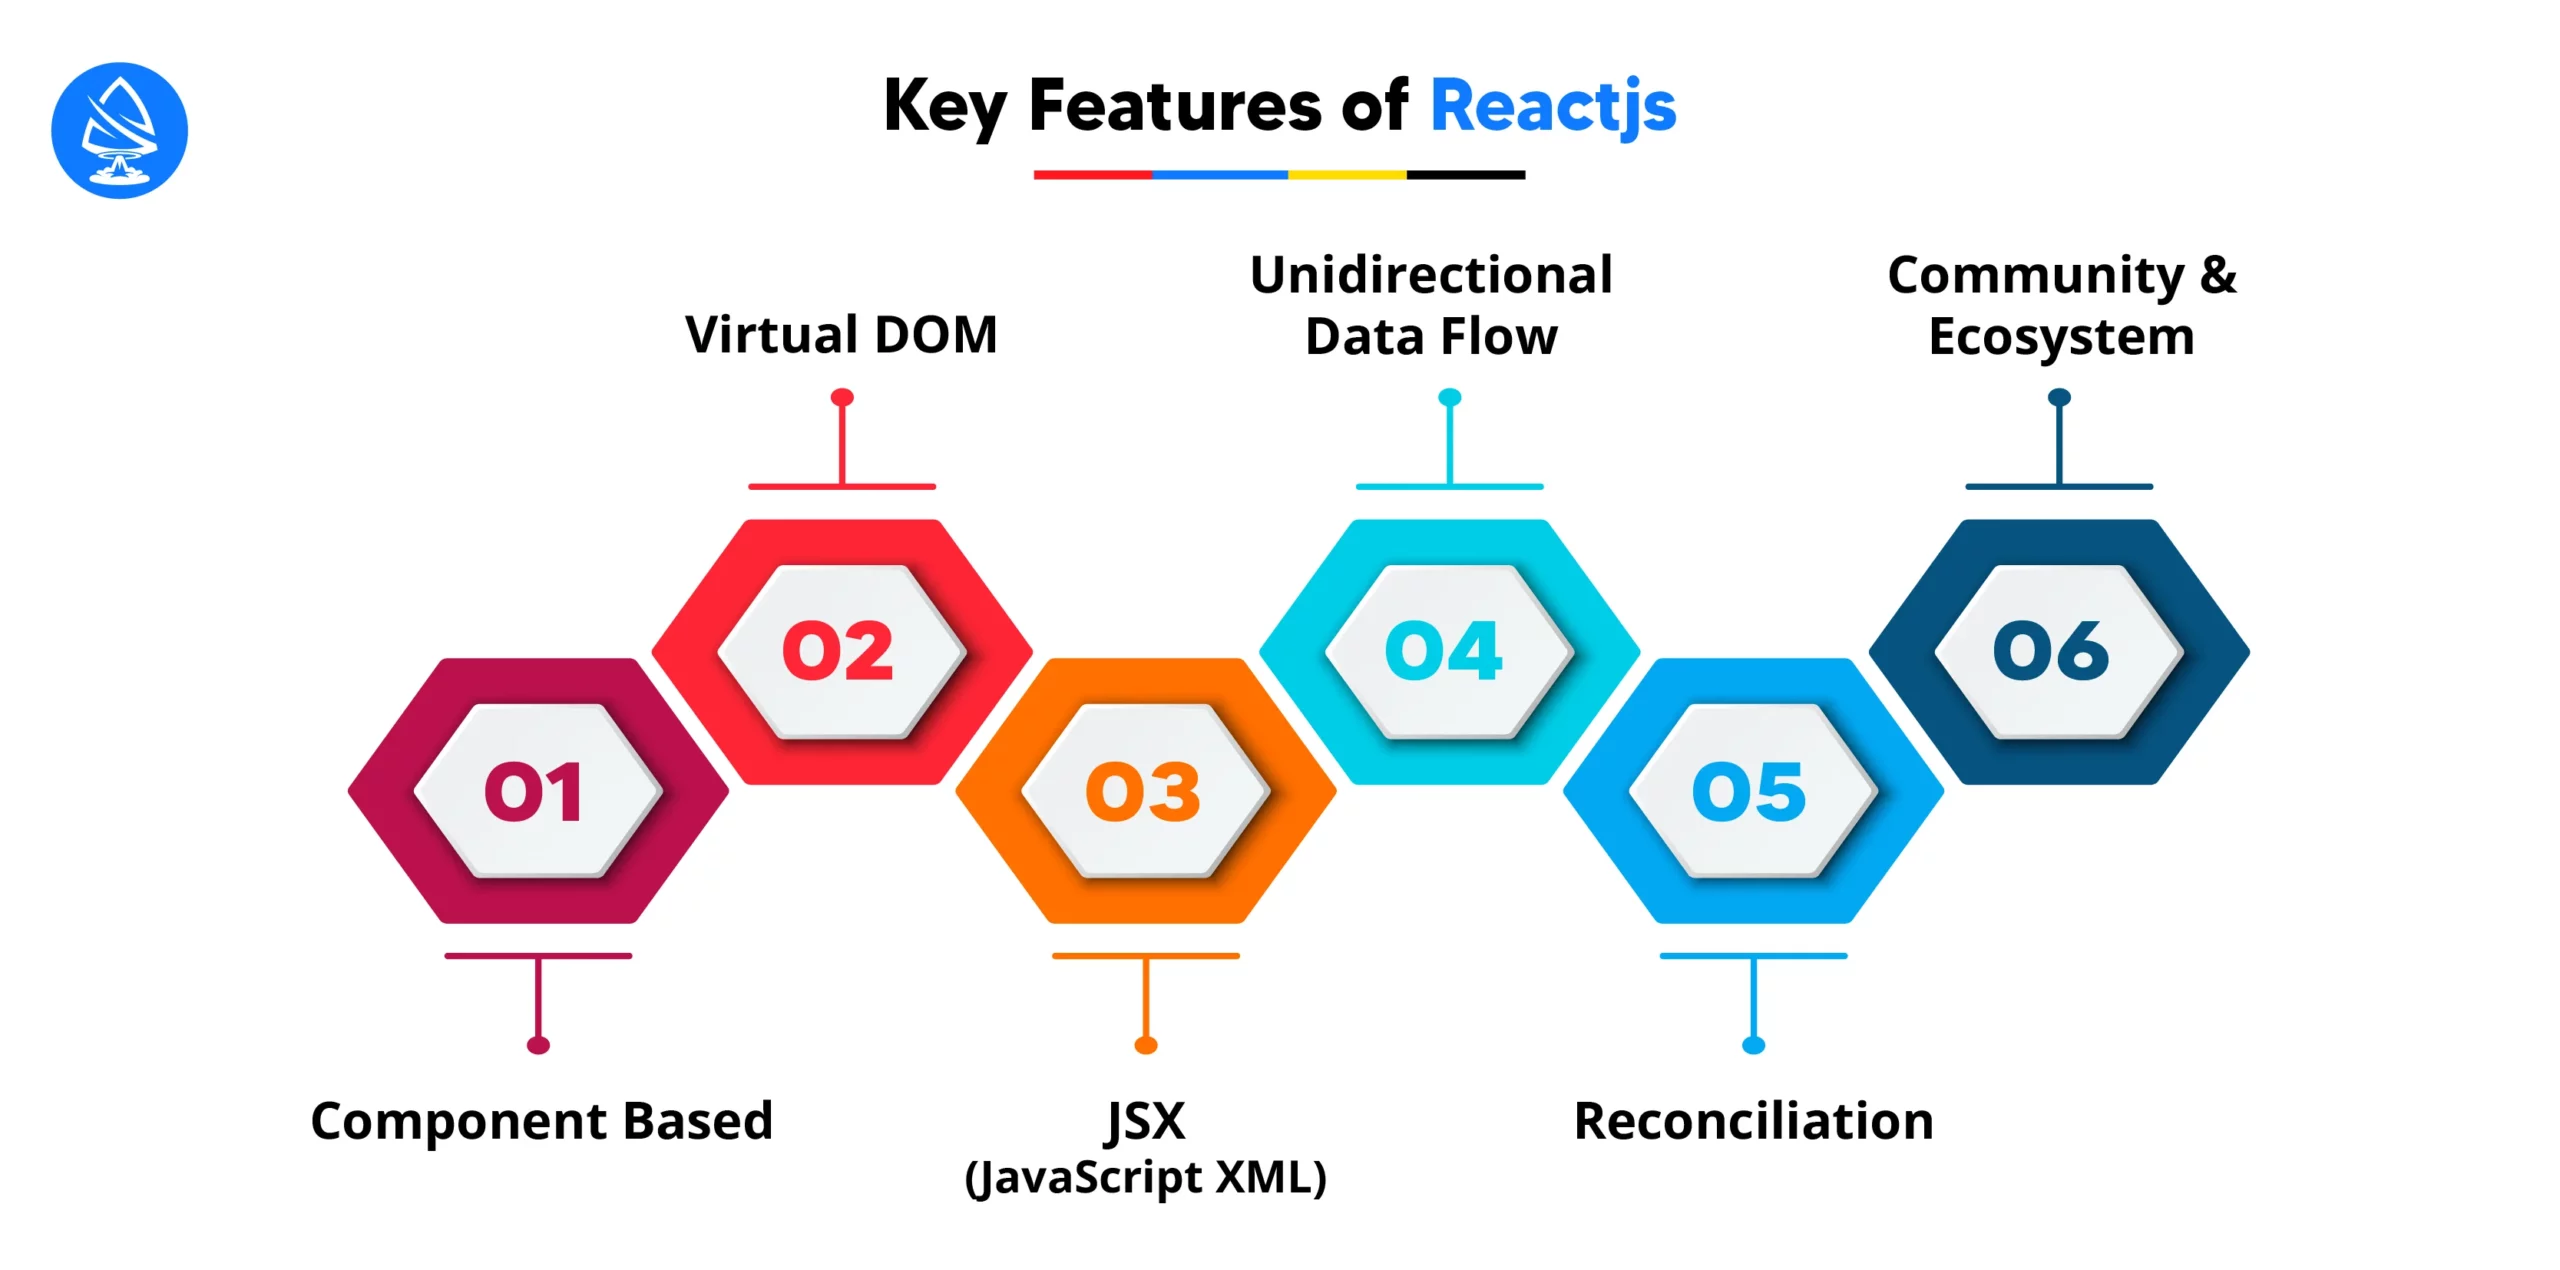 Key Features of React.js